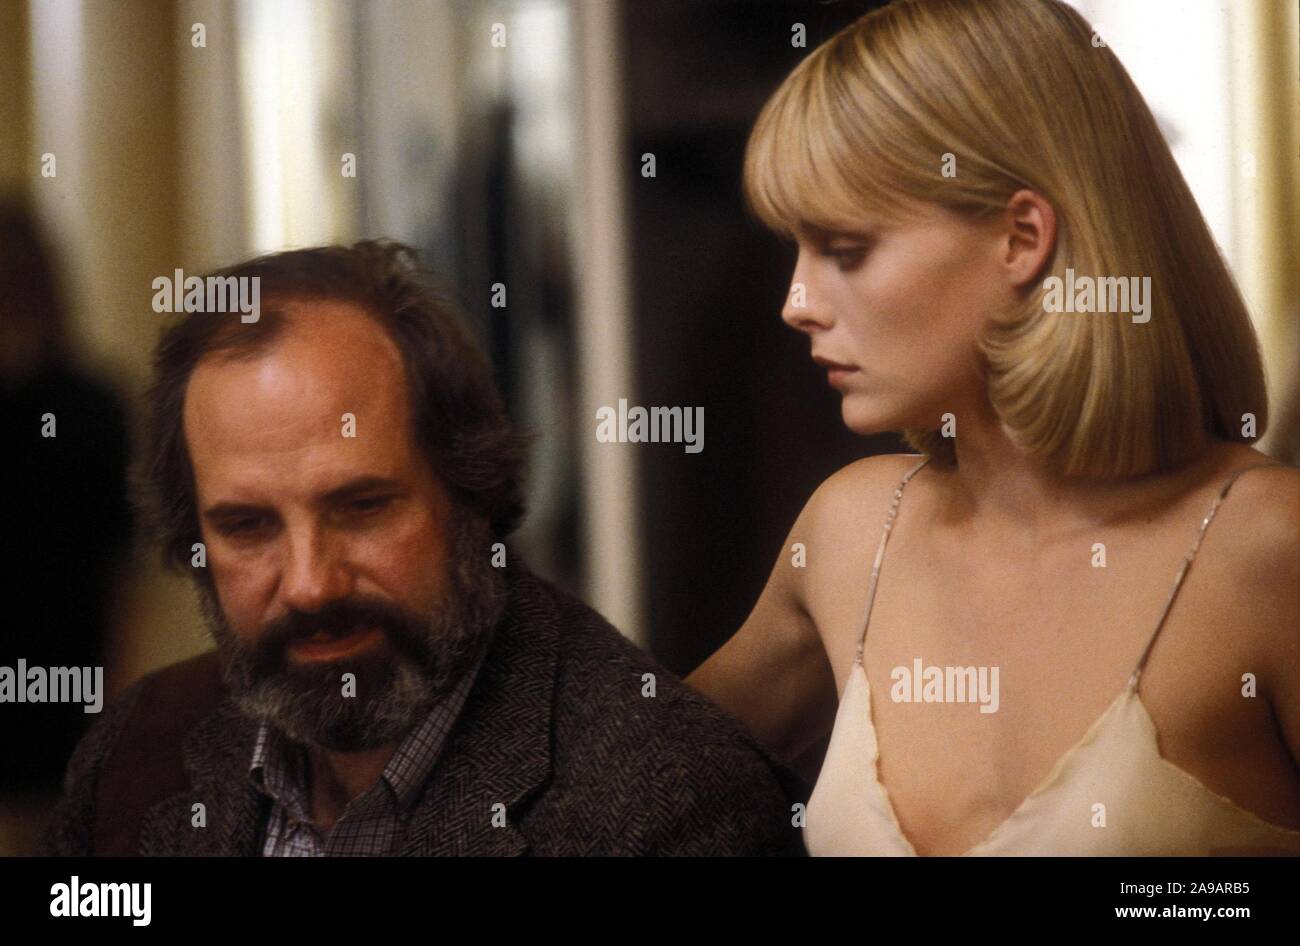 MICHELLE PFEIFFER and BRIAN DE PALMA in SCARFACE (1983), directed by BRIAN DE PALMA. Credit: UNIVERSAL PICTURES / Album Stock Photo